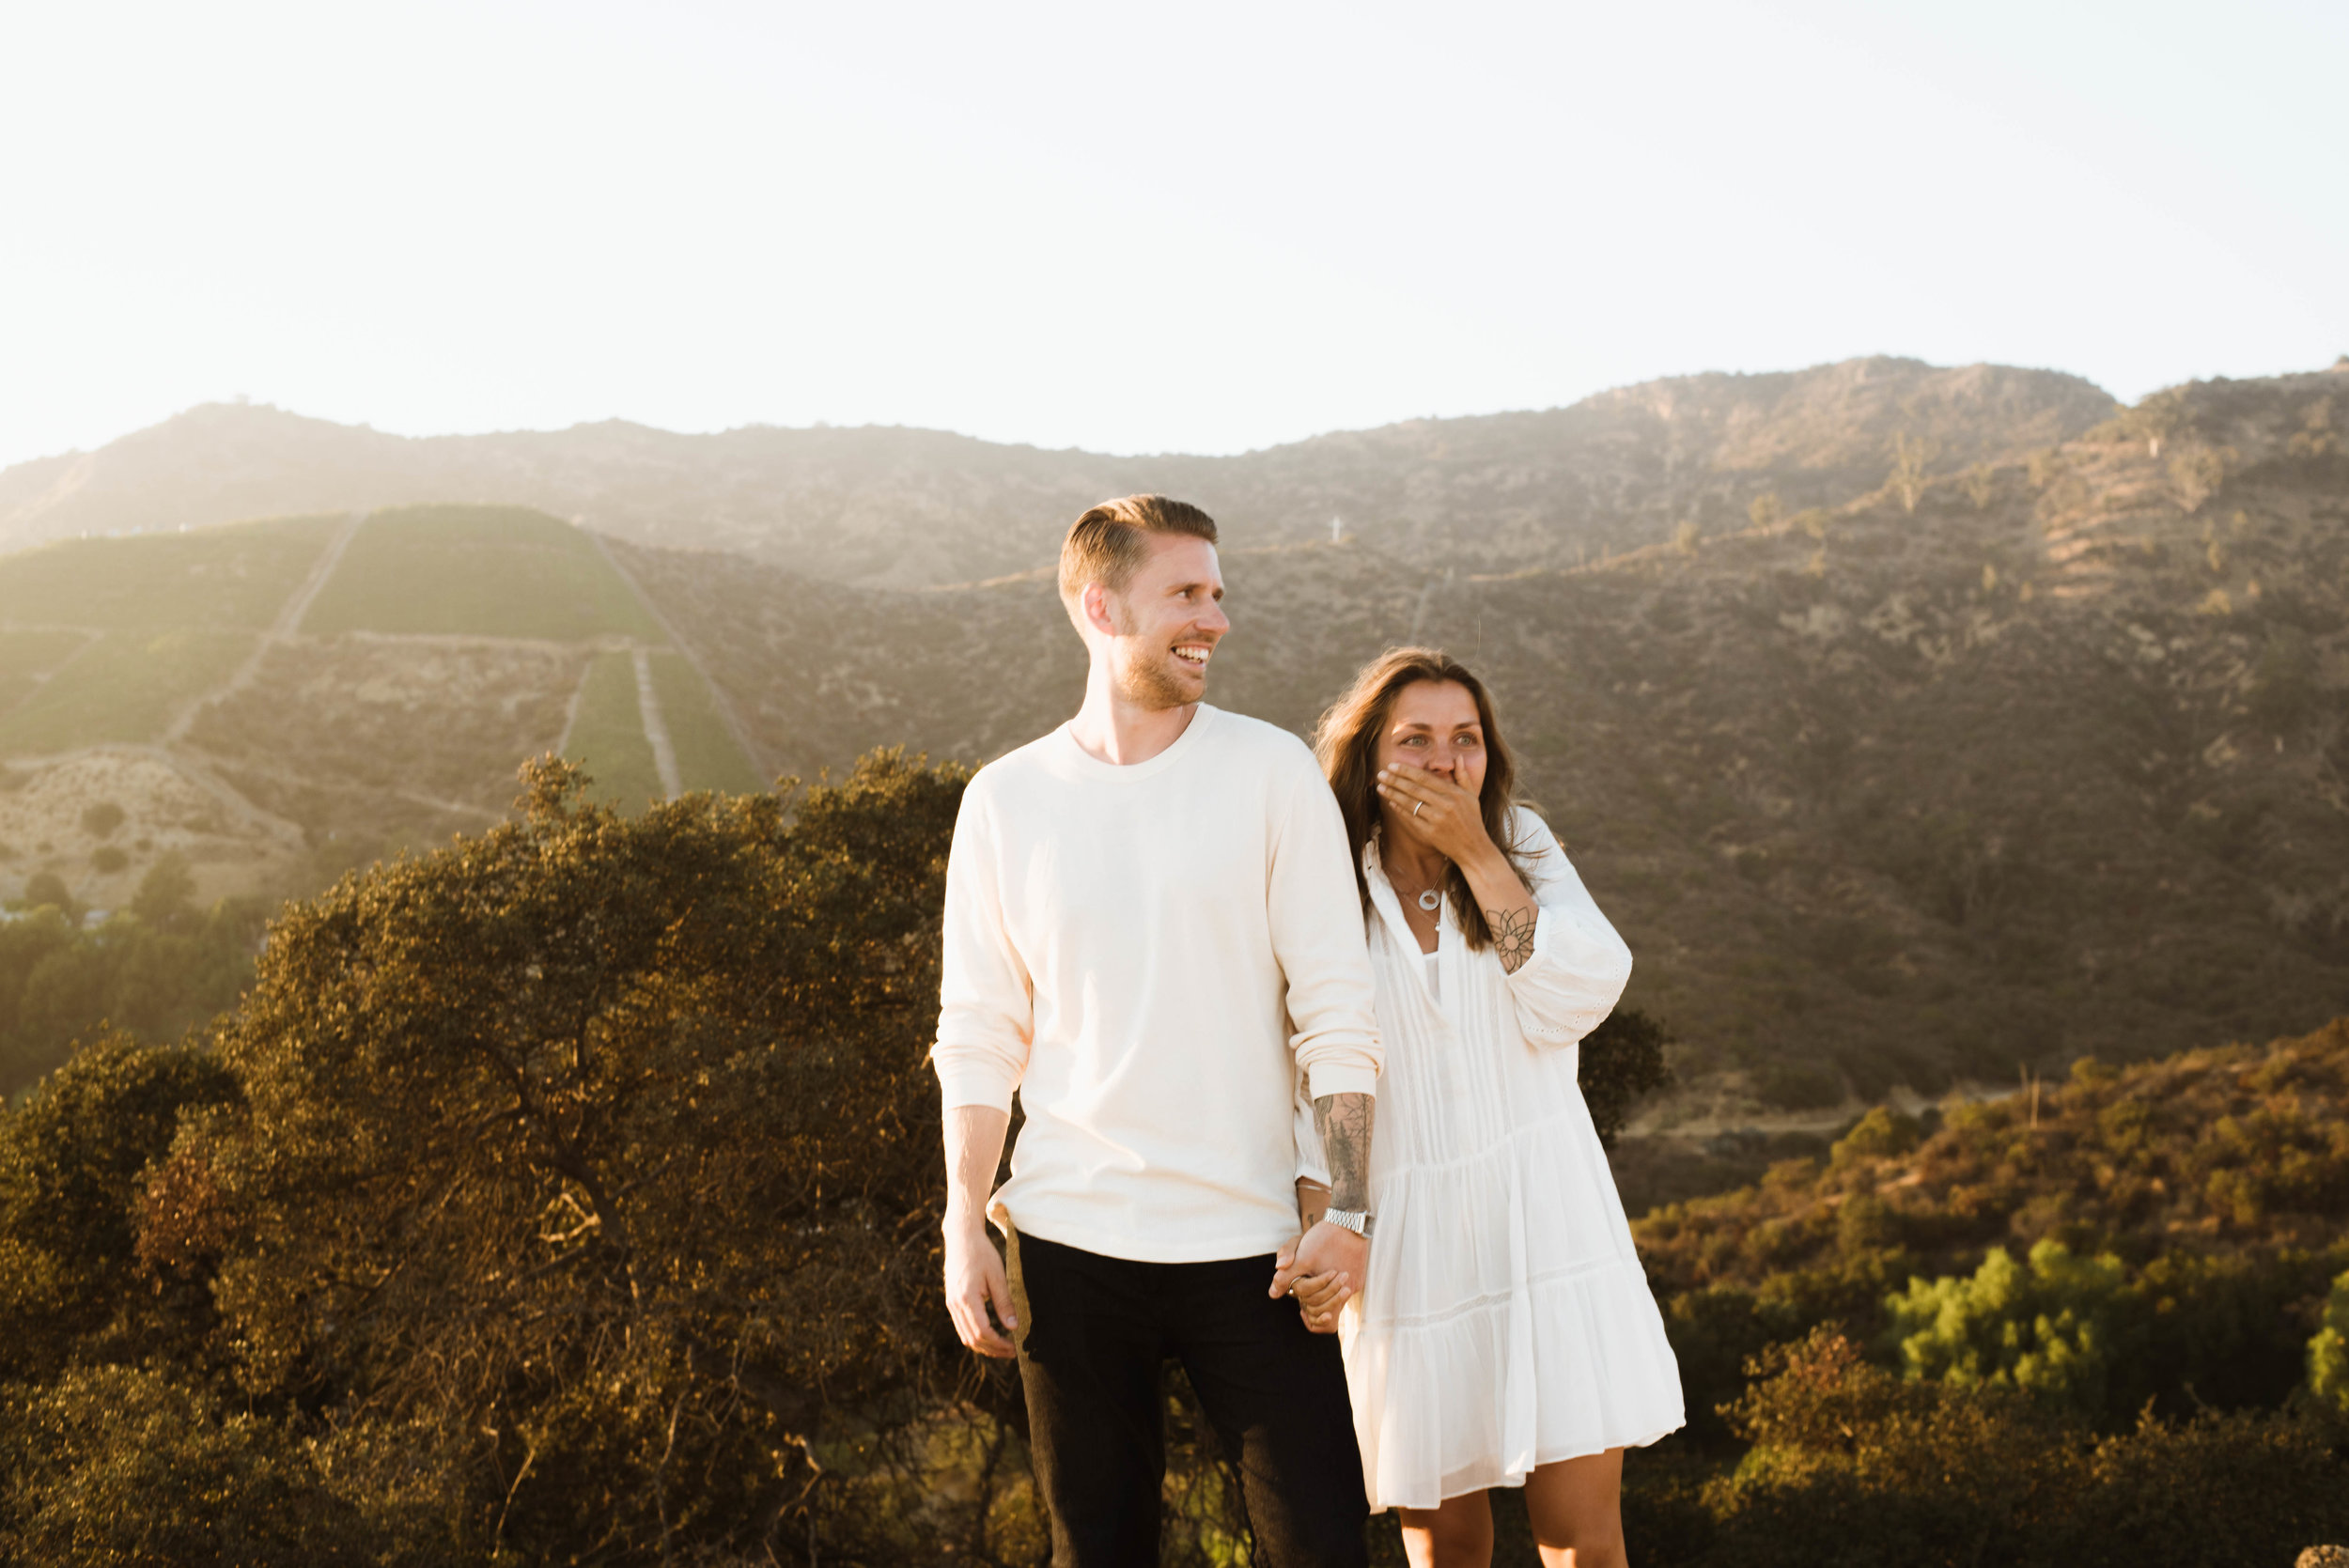 A sun kissed proposal in the Hollywood Hills